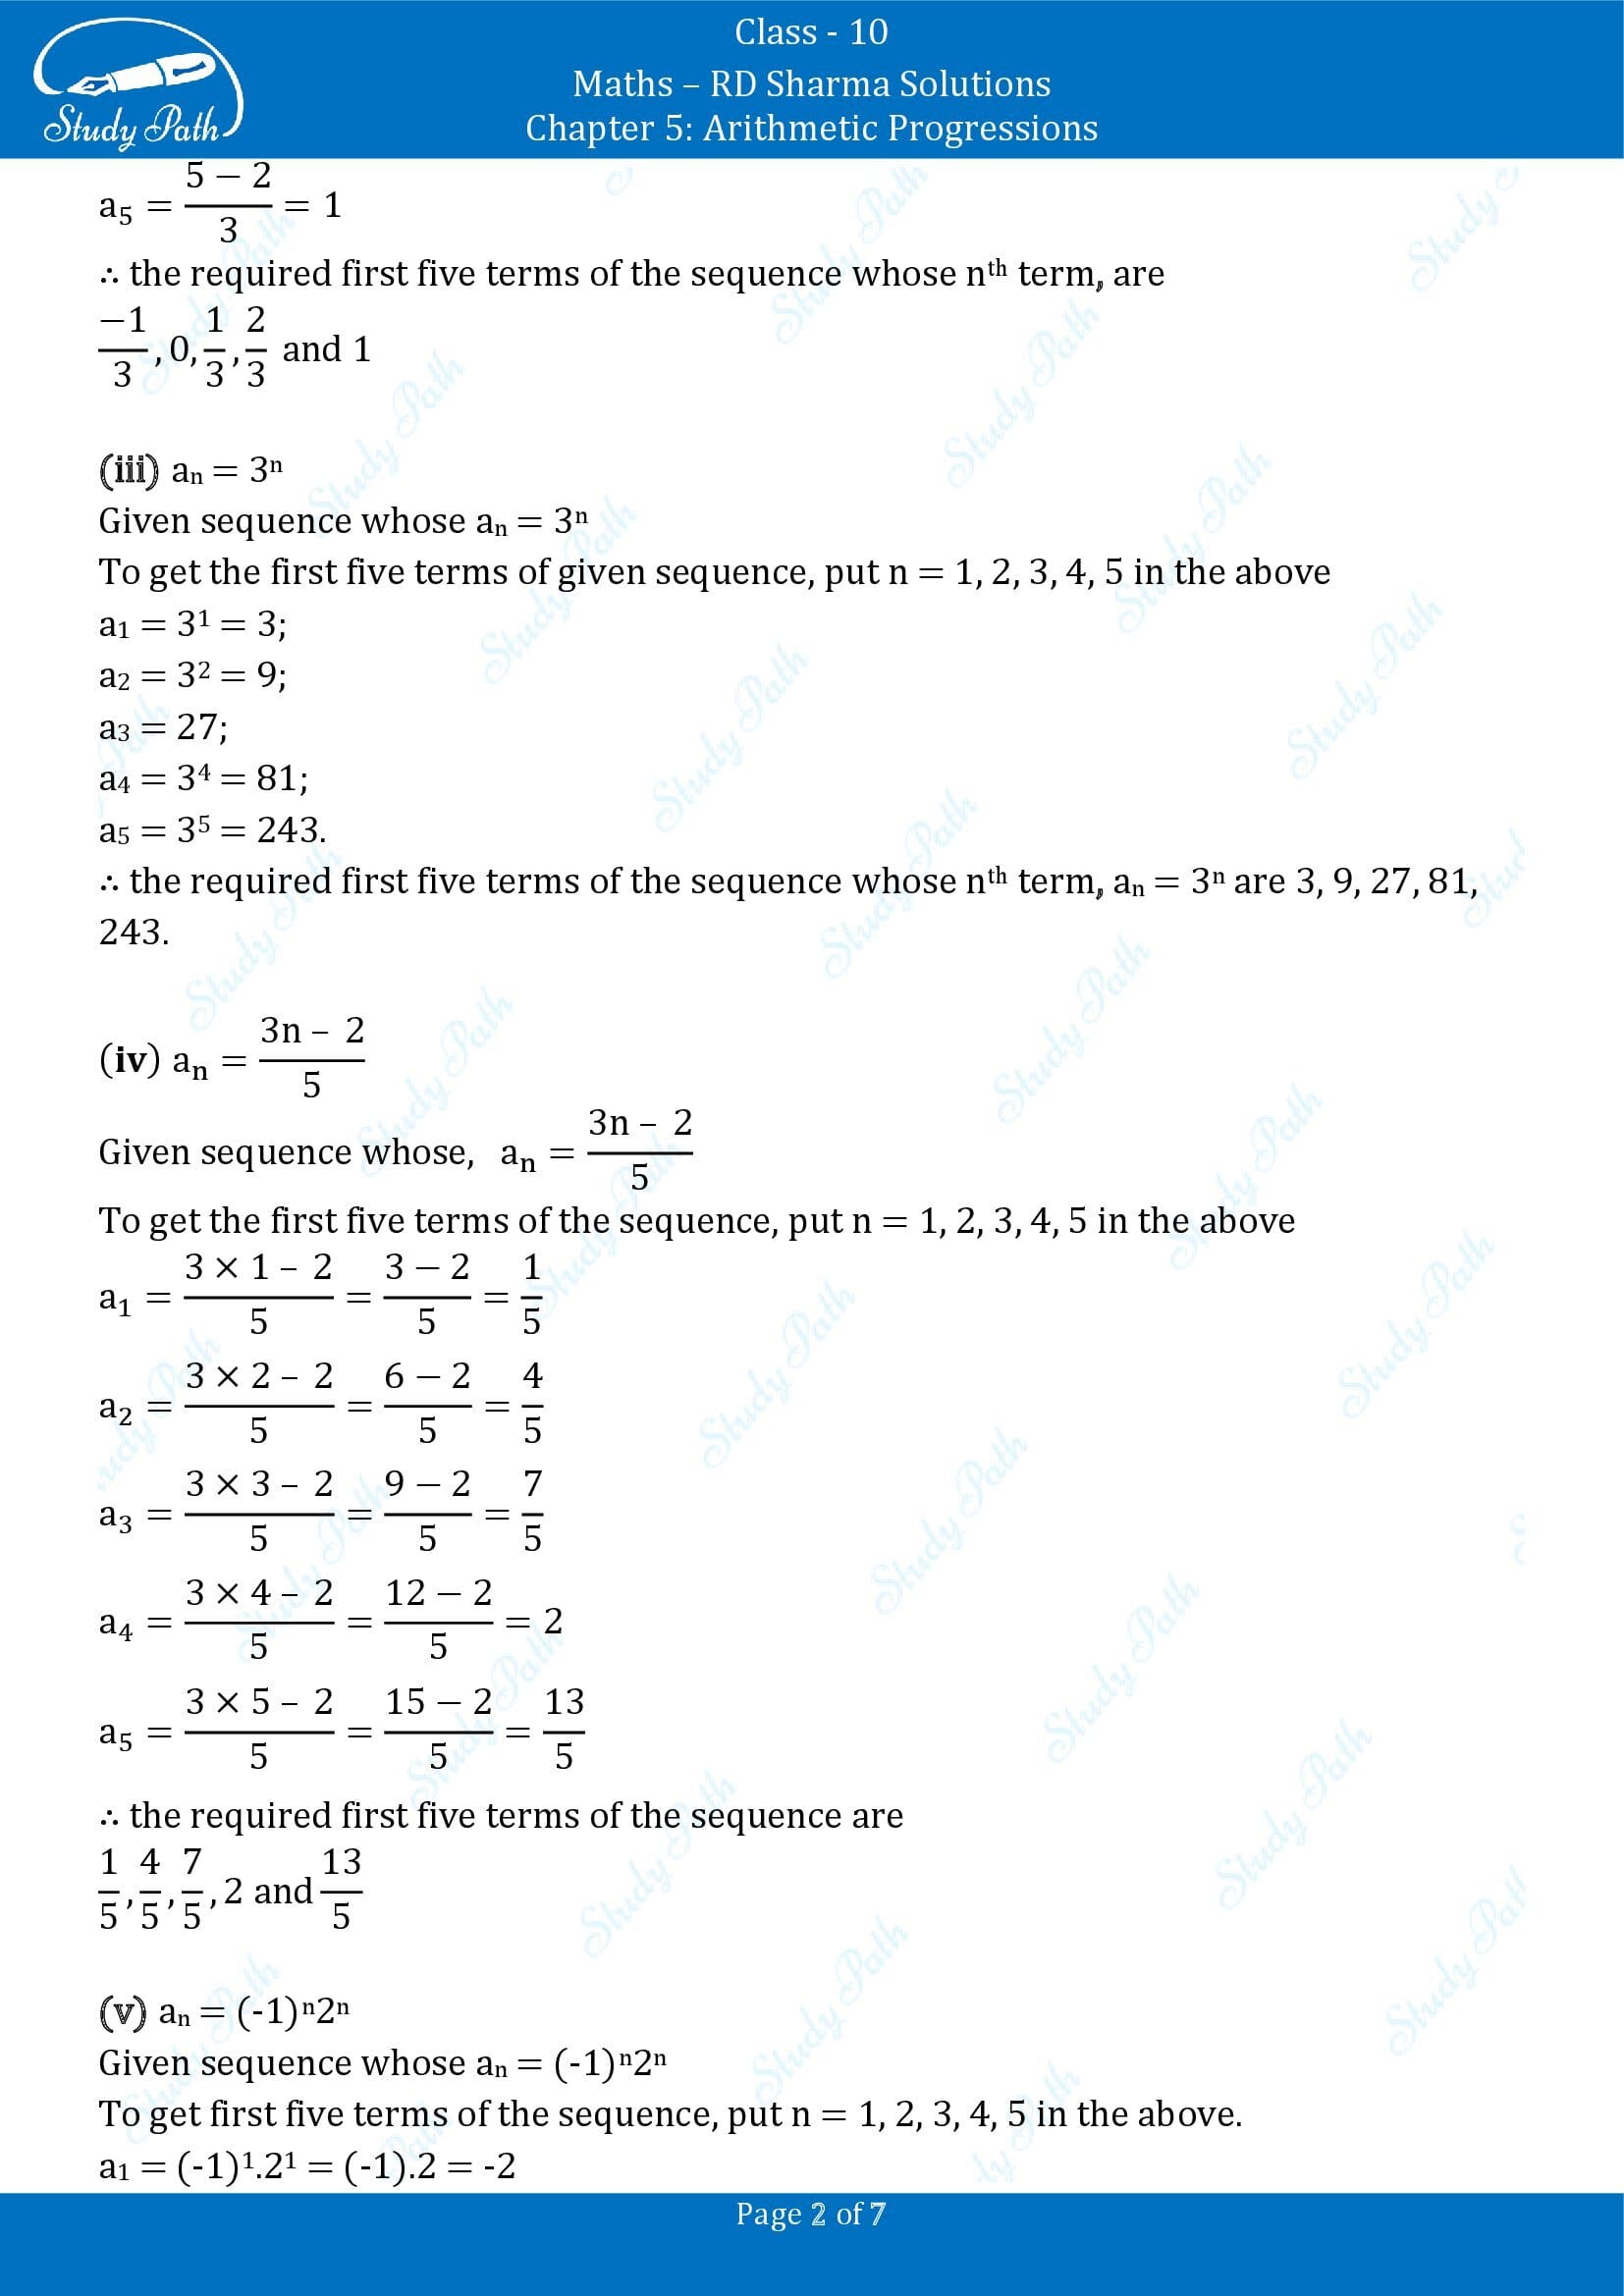 RD Sharma Solutions Class 10 Chapter 5 Arithmetic Progressions Exercise 5.1 00002